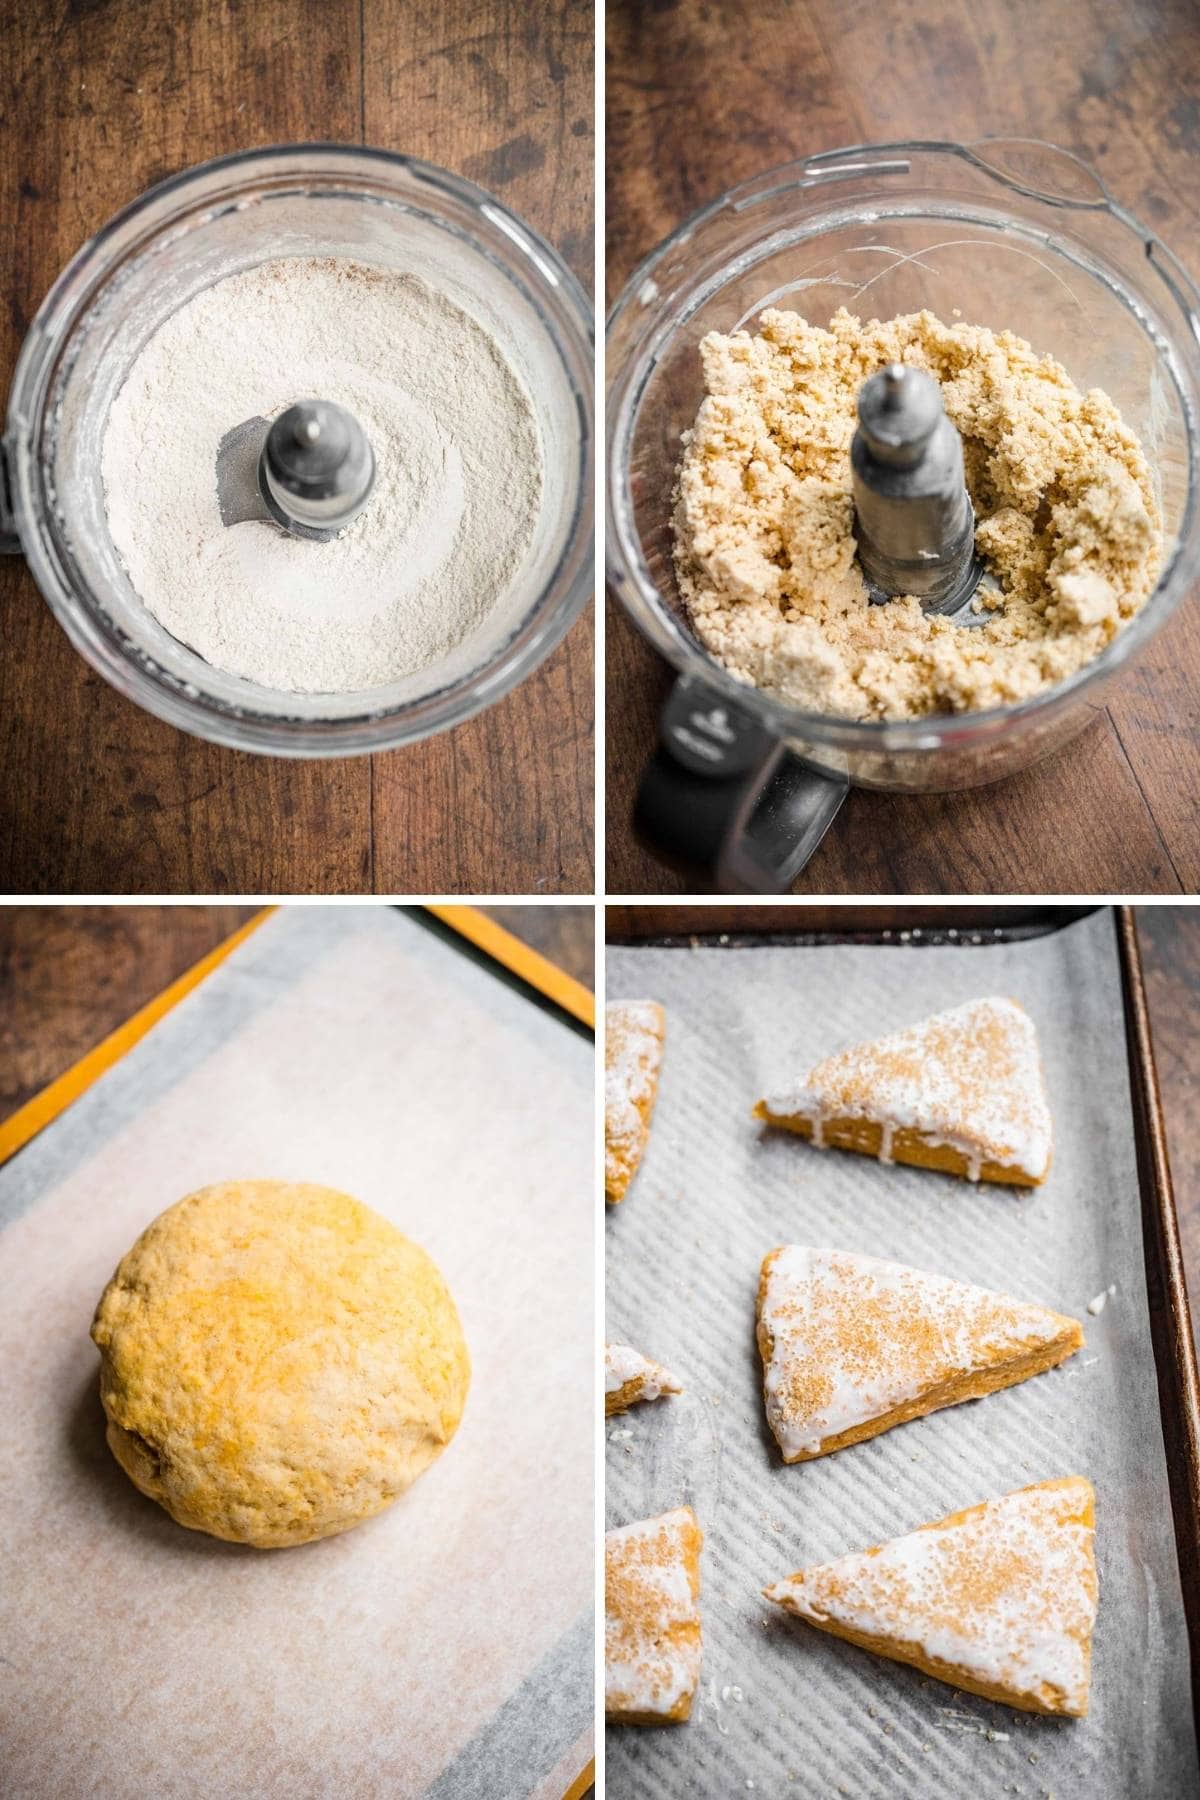 Collage of Pumpkin Scones from ingredients, mix, dough, and ready to bake!